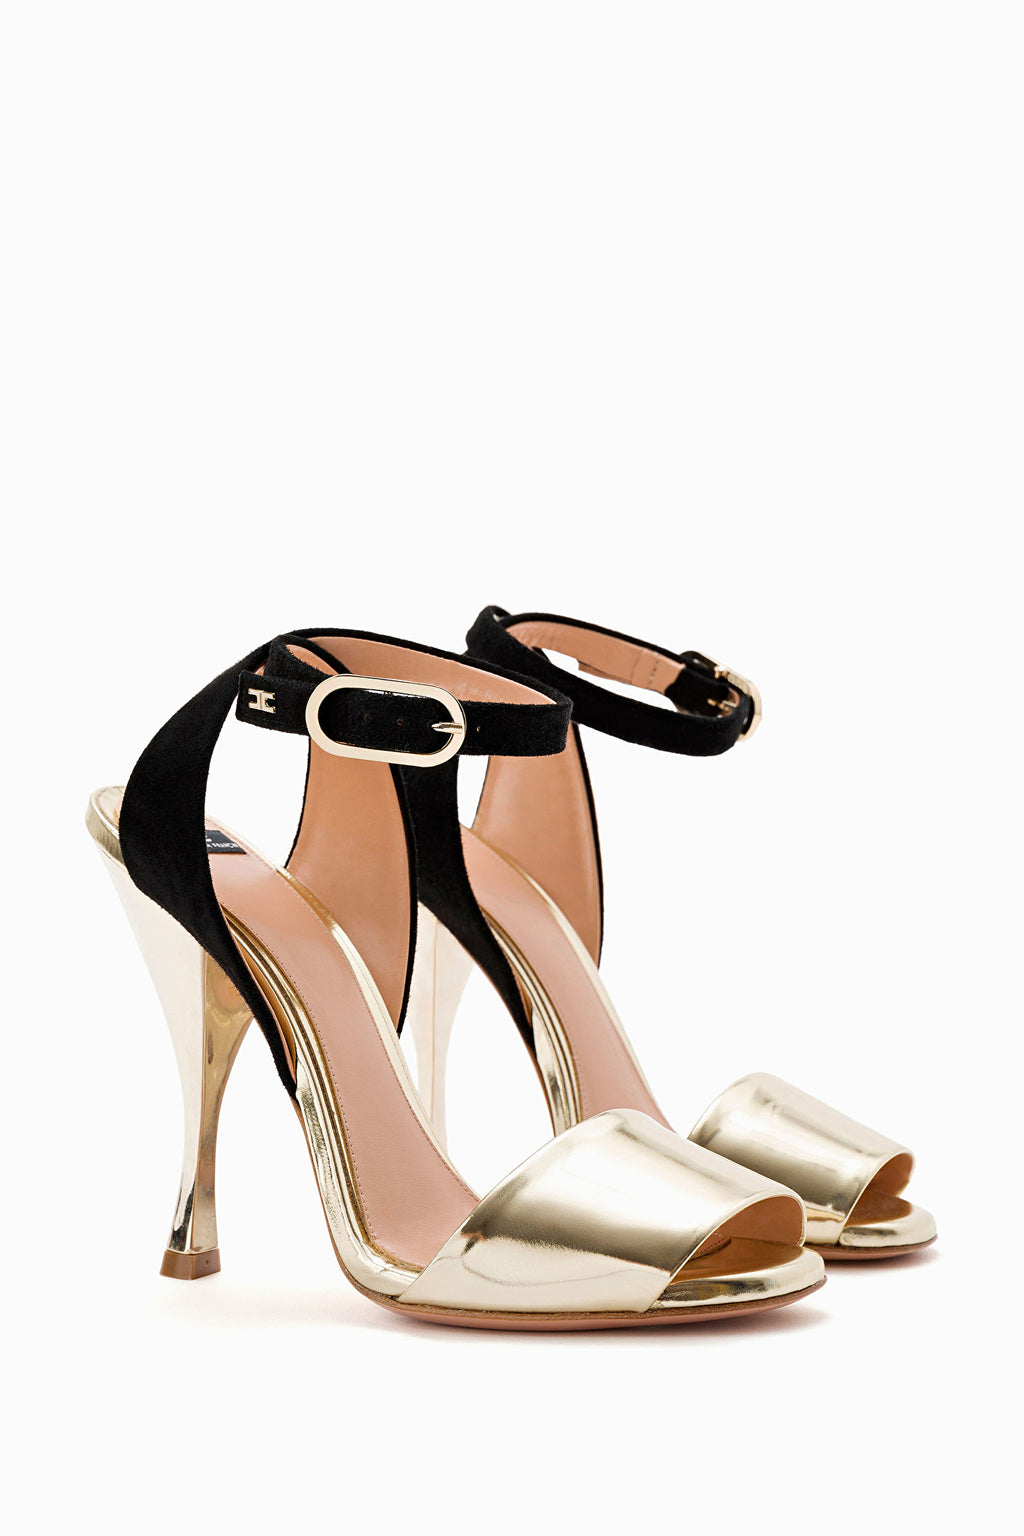 gold high heel sandals with black ankle strap